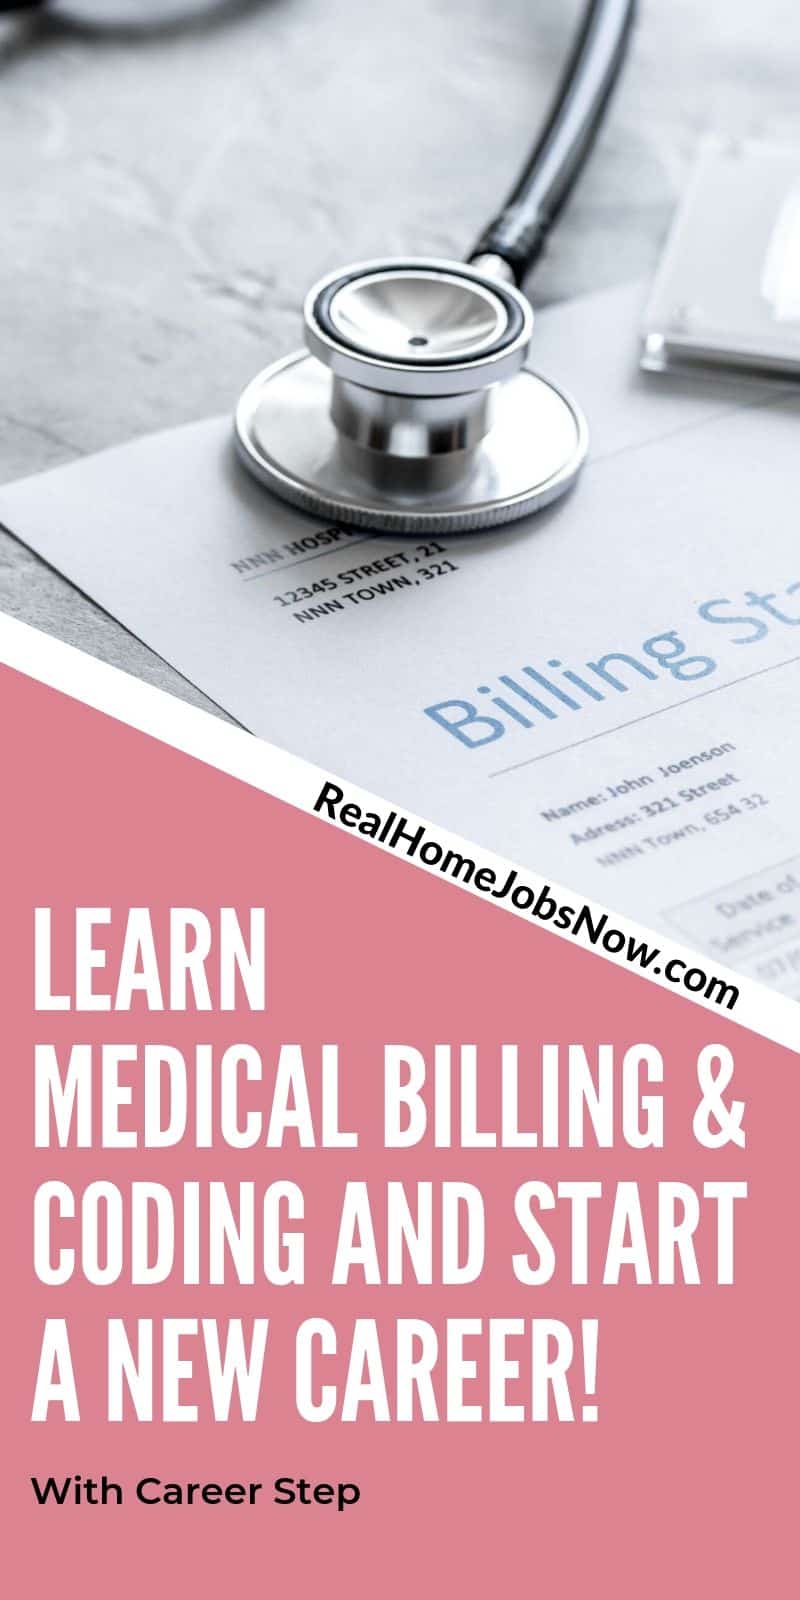 Medical billing and coding is a career option that is expected to grow, does not require a degree, and allows the option to work at home or start a home business.